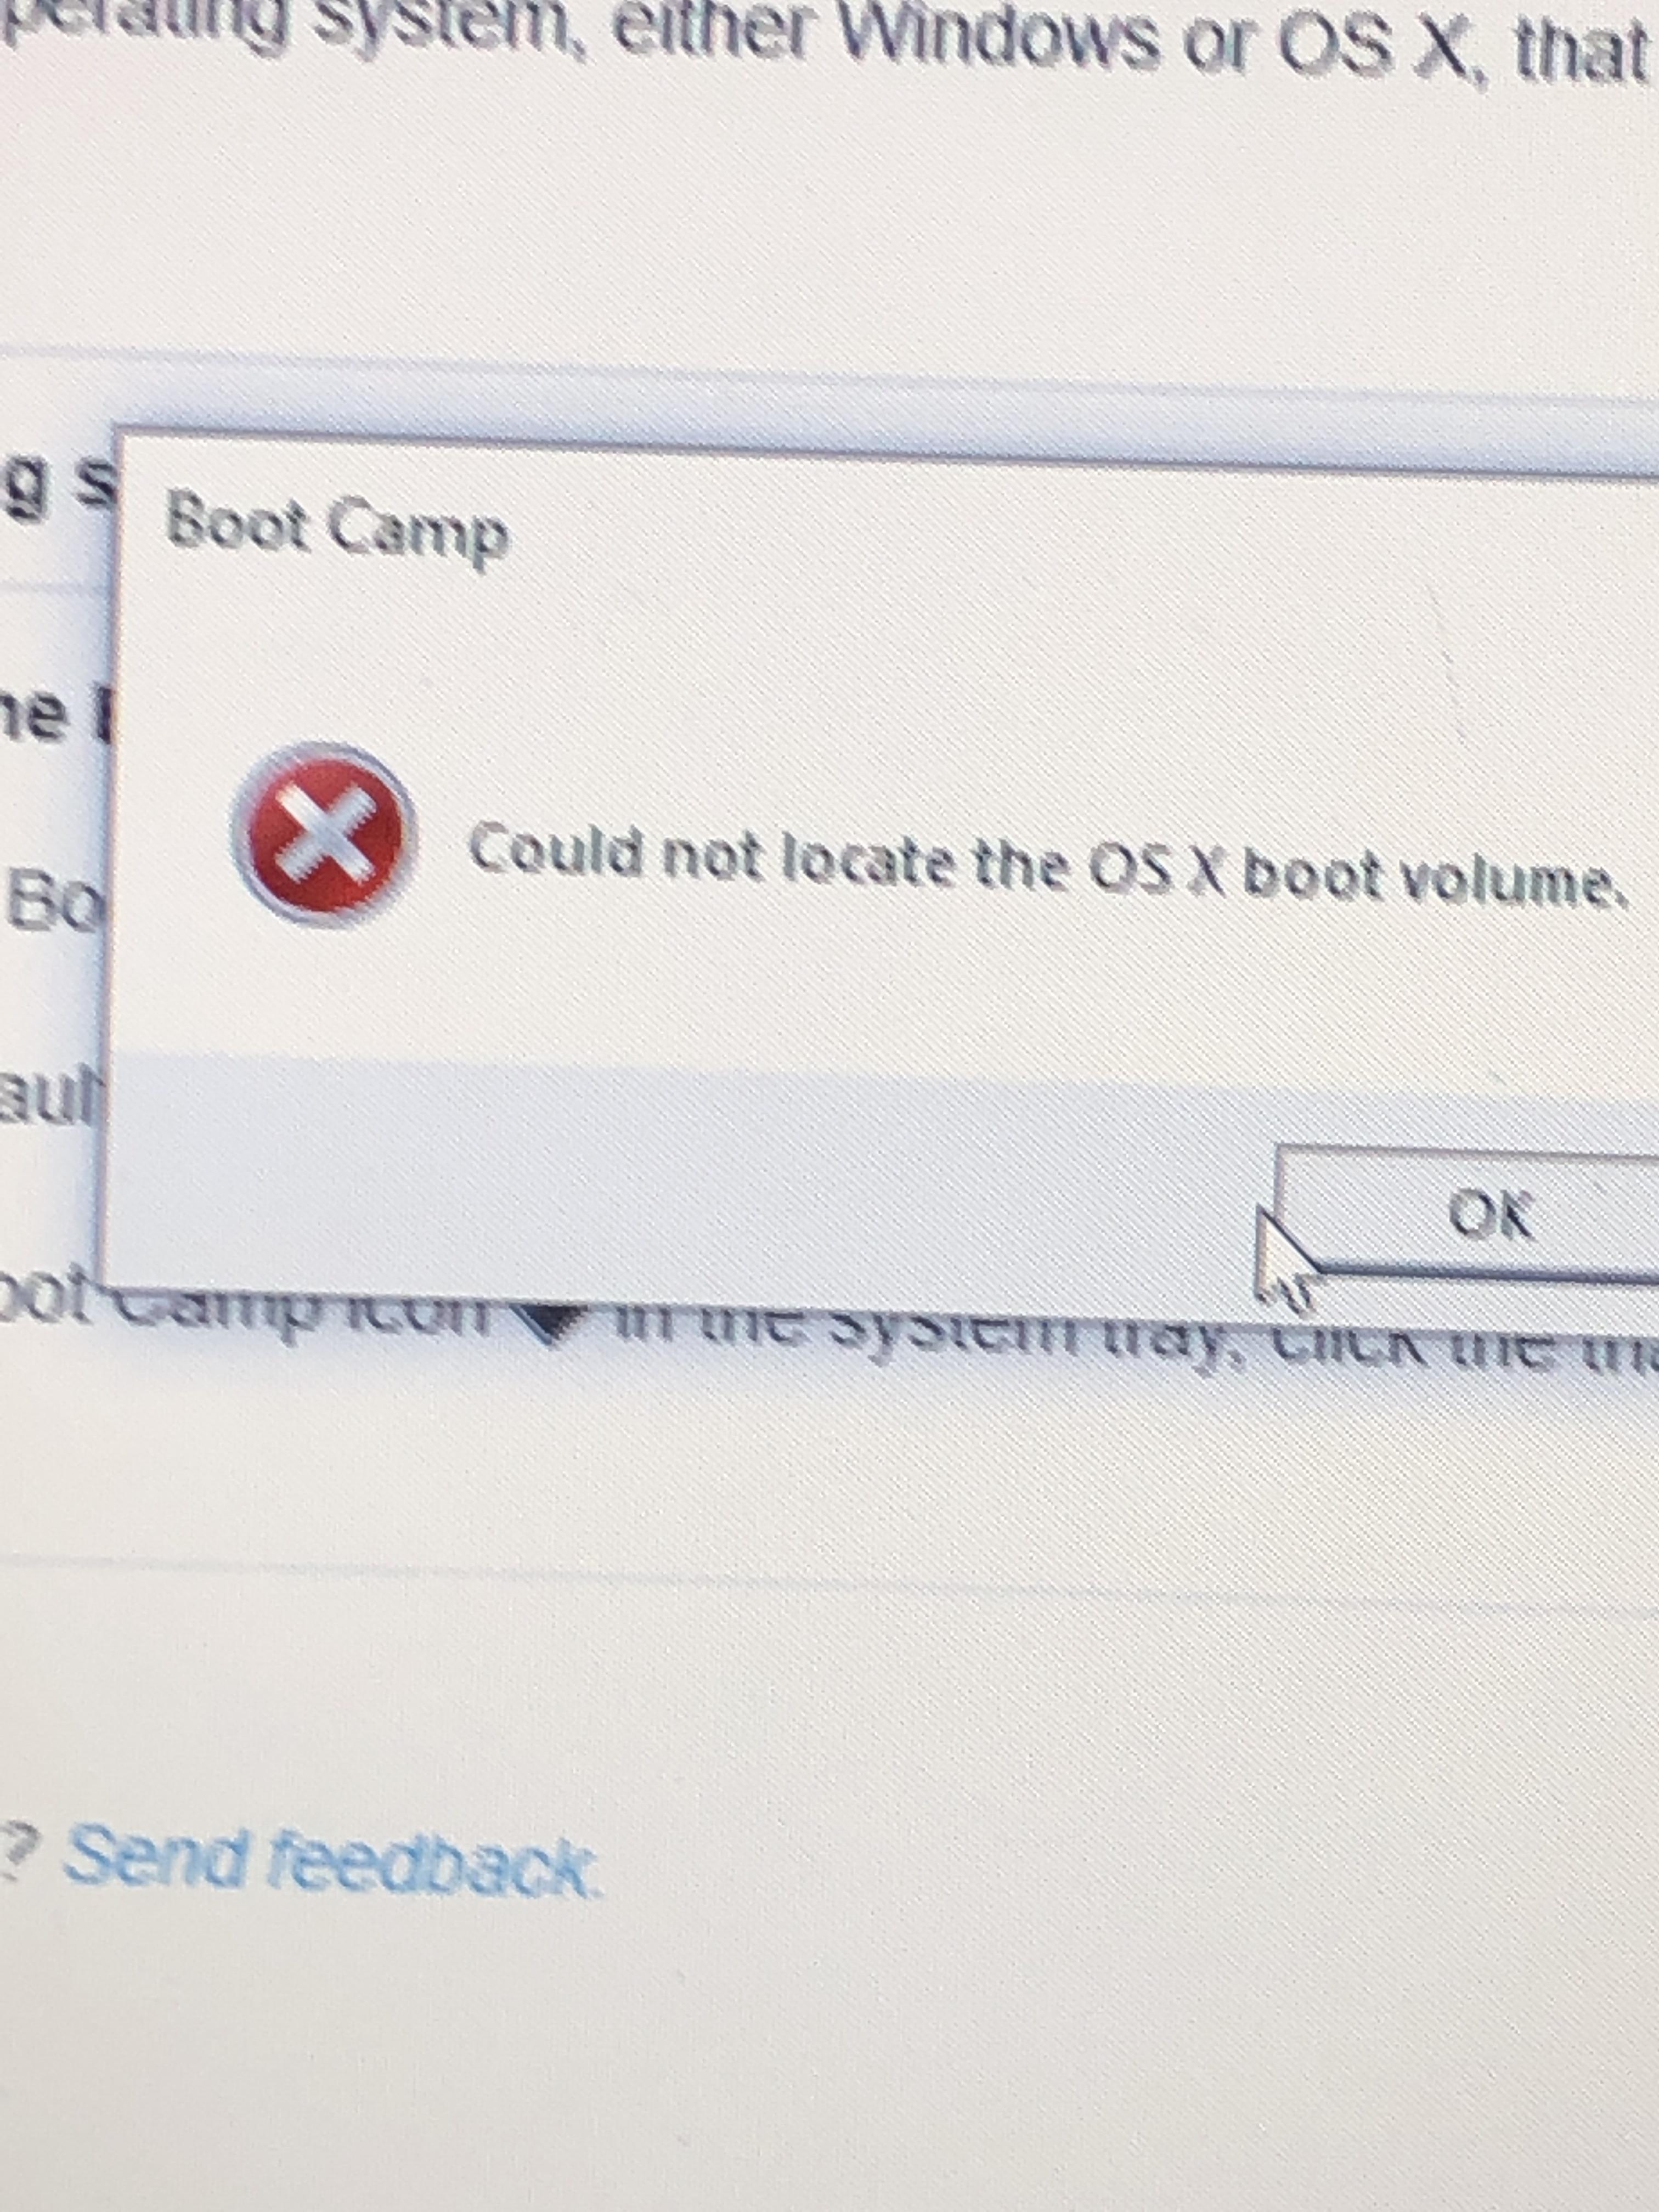 apple boot camp mic missing from windows 10